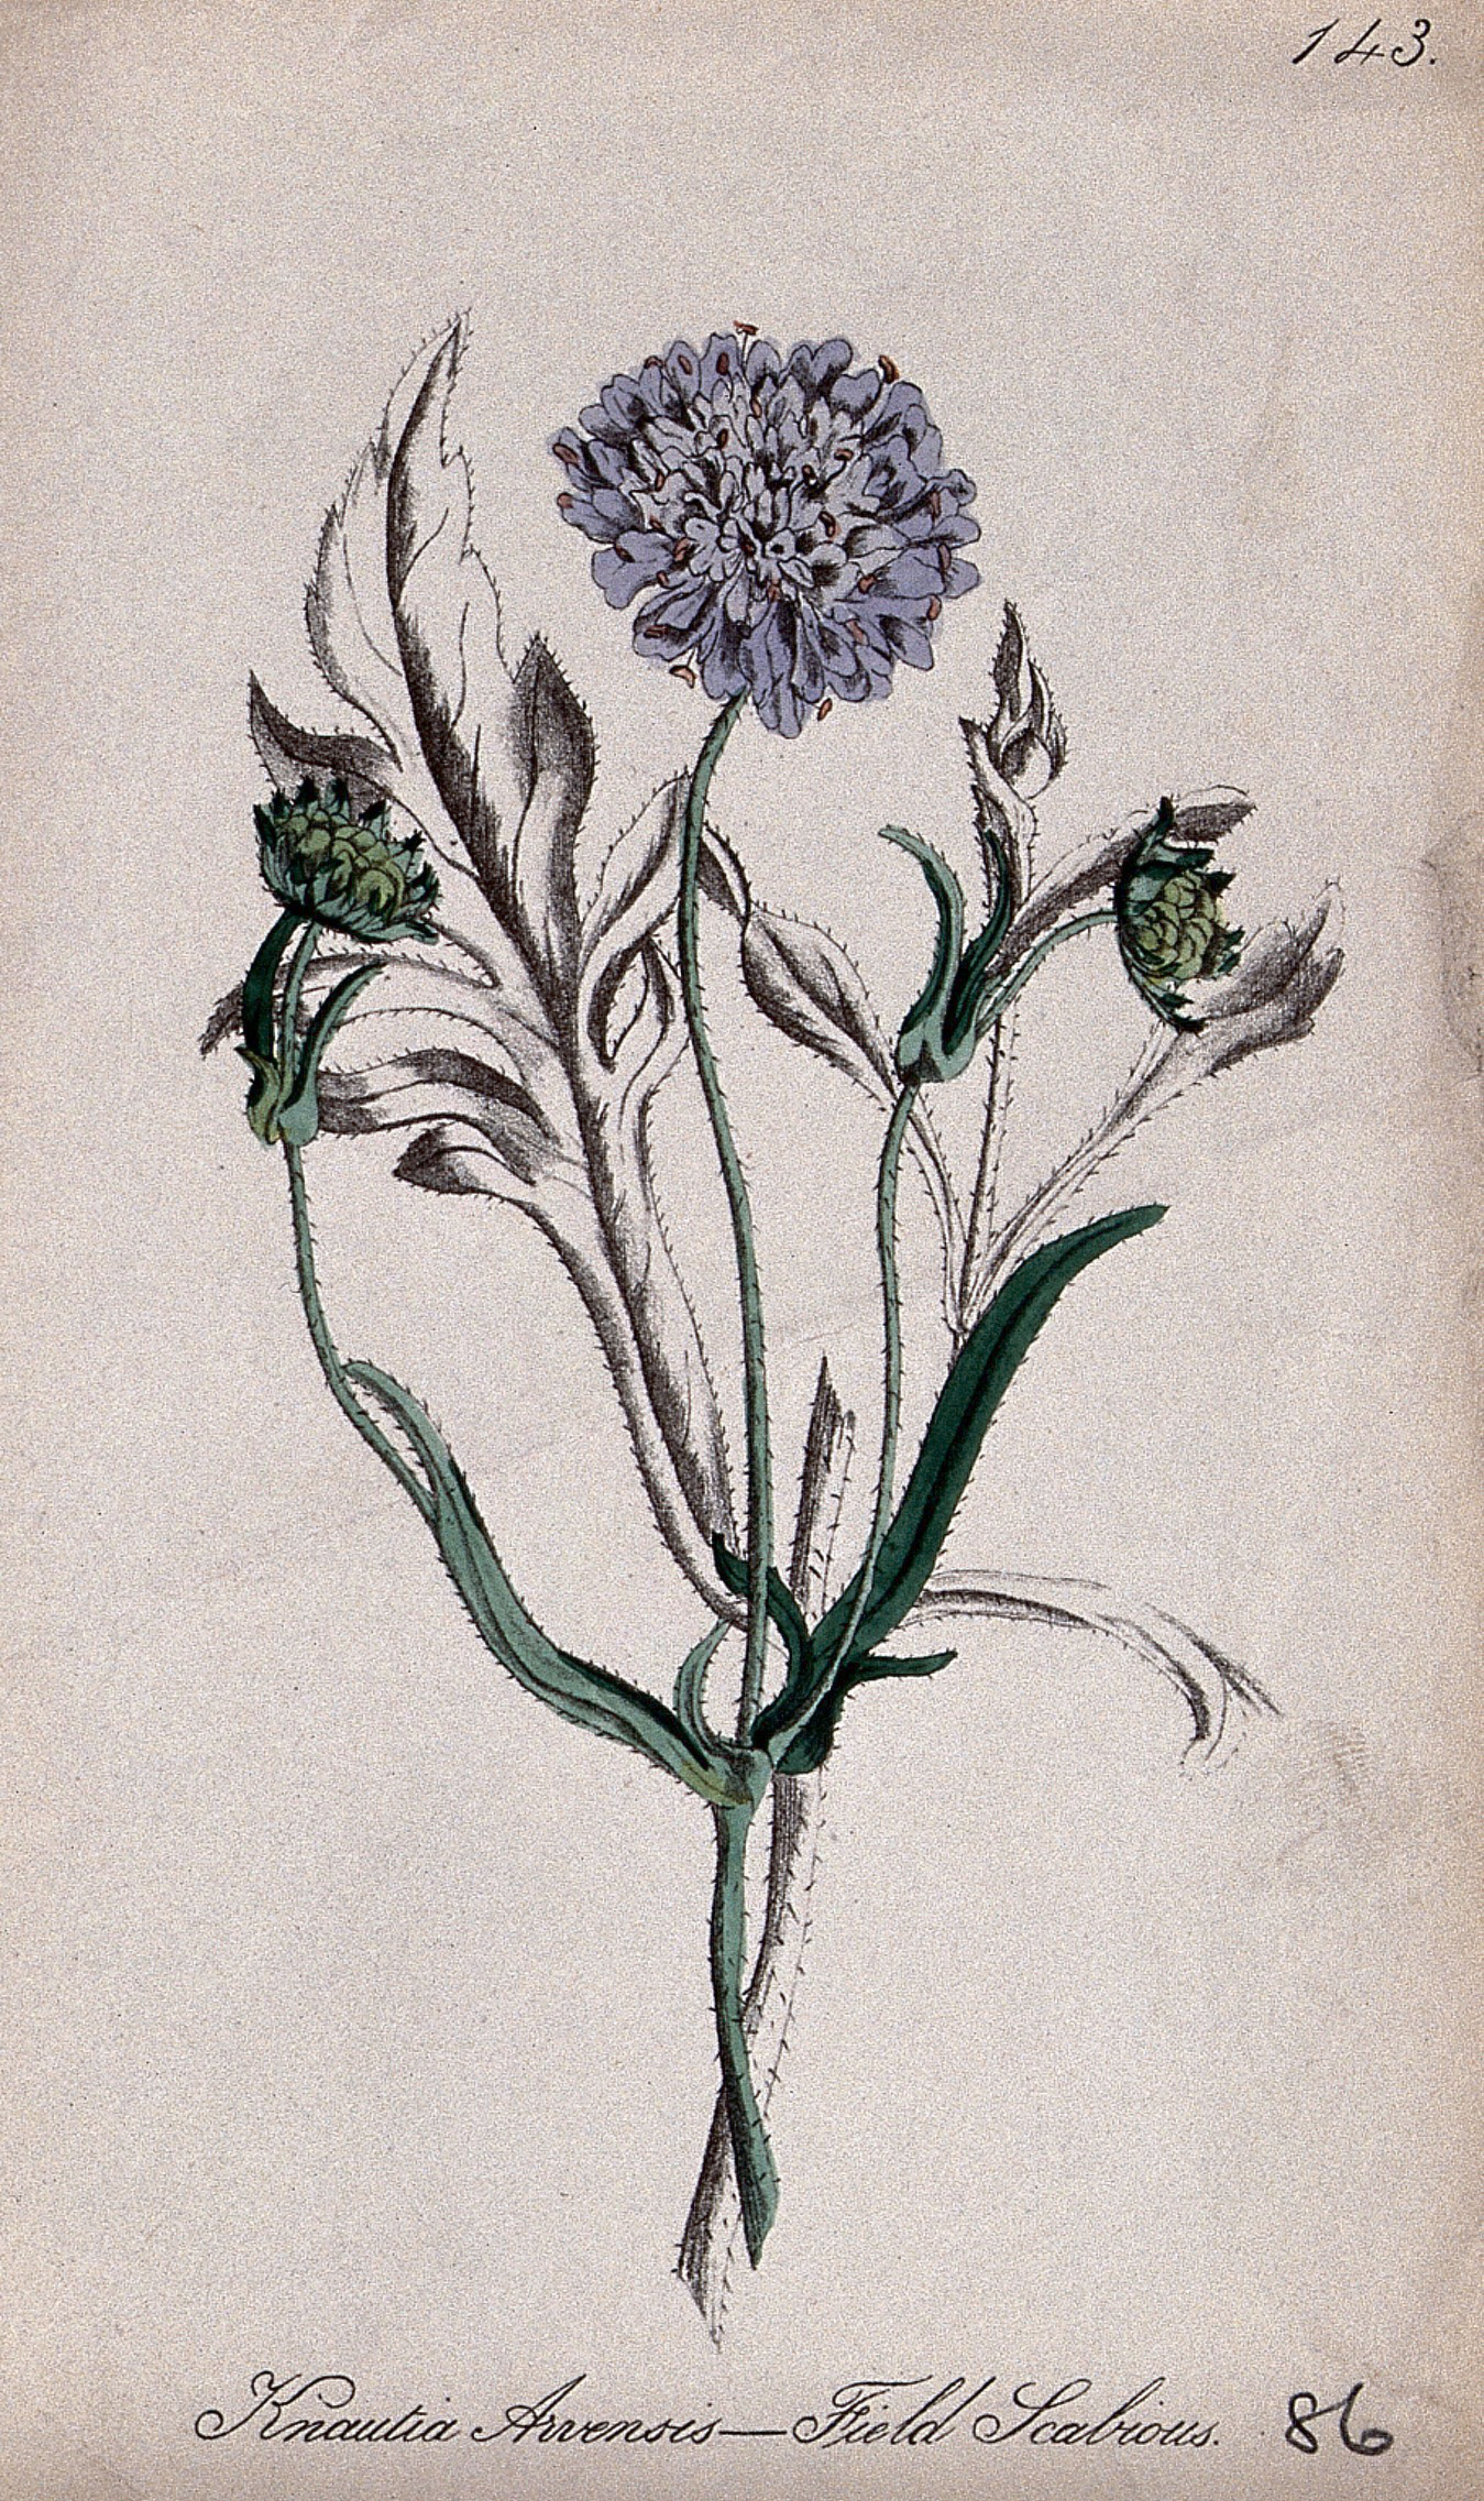 Field scabious plant (Knautia arvensis): flowering and fruiting stem. Partially coloured lithograph by F. Waller, c. 1863, after C. Gower.